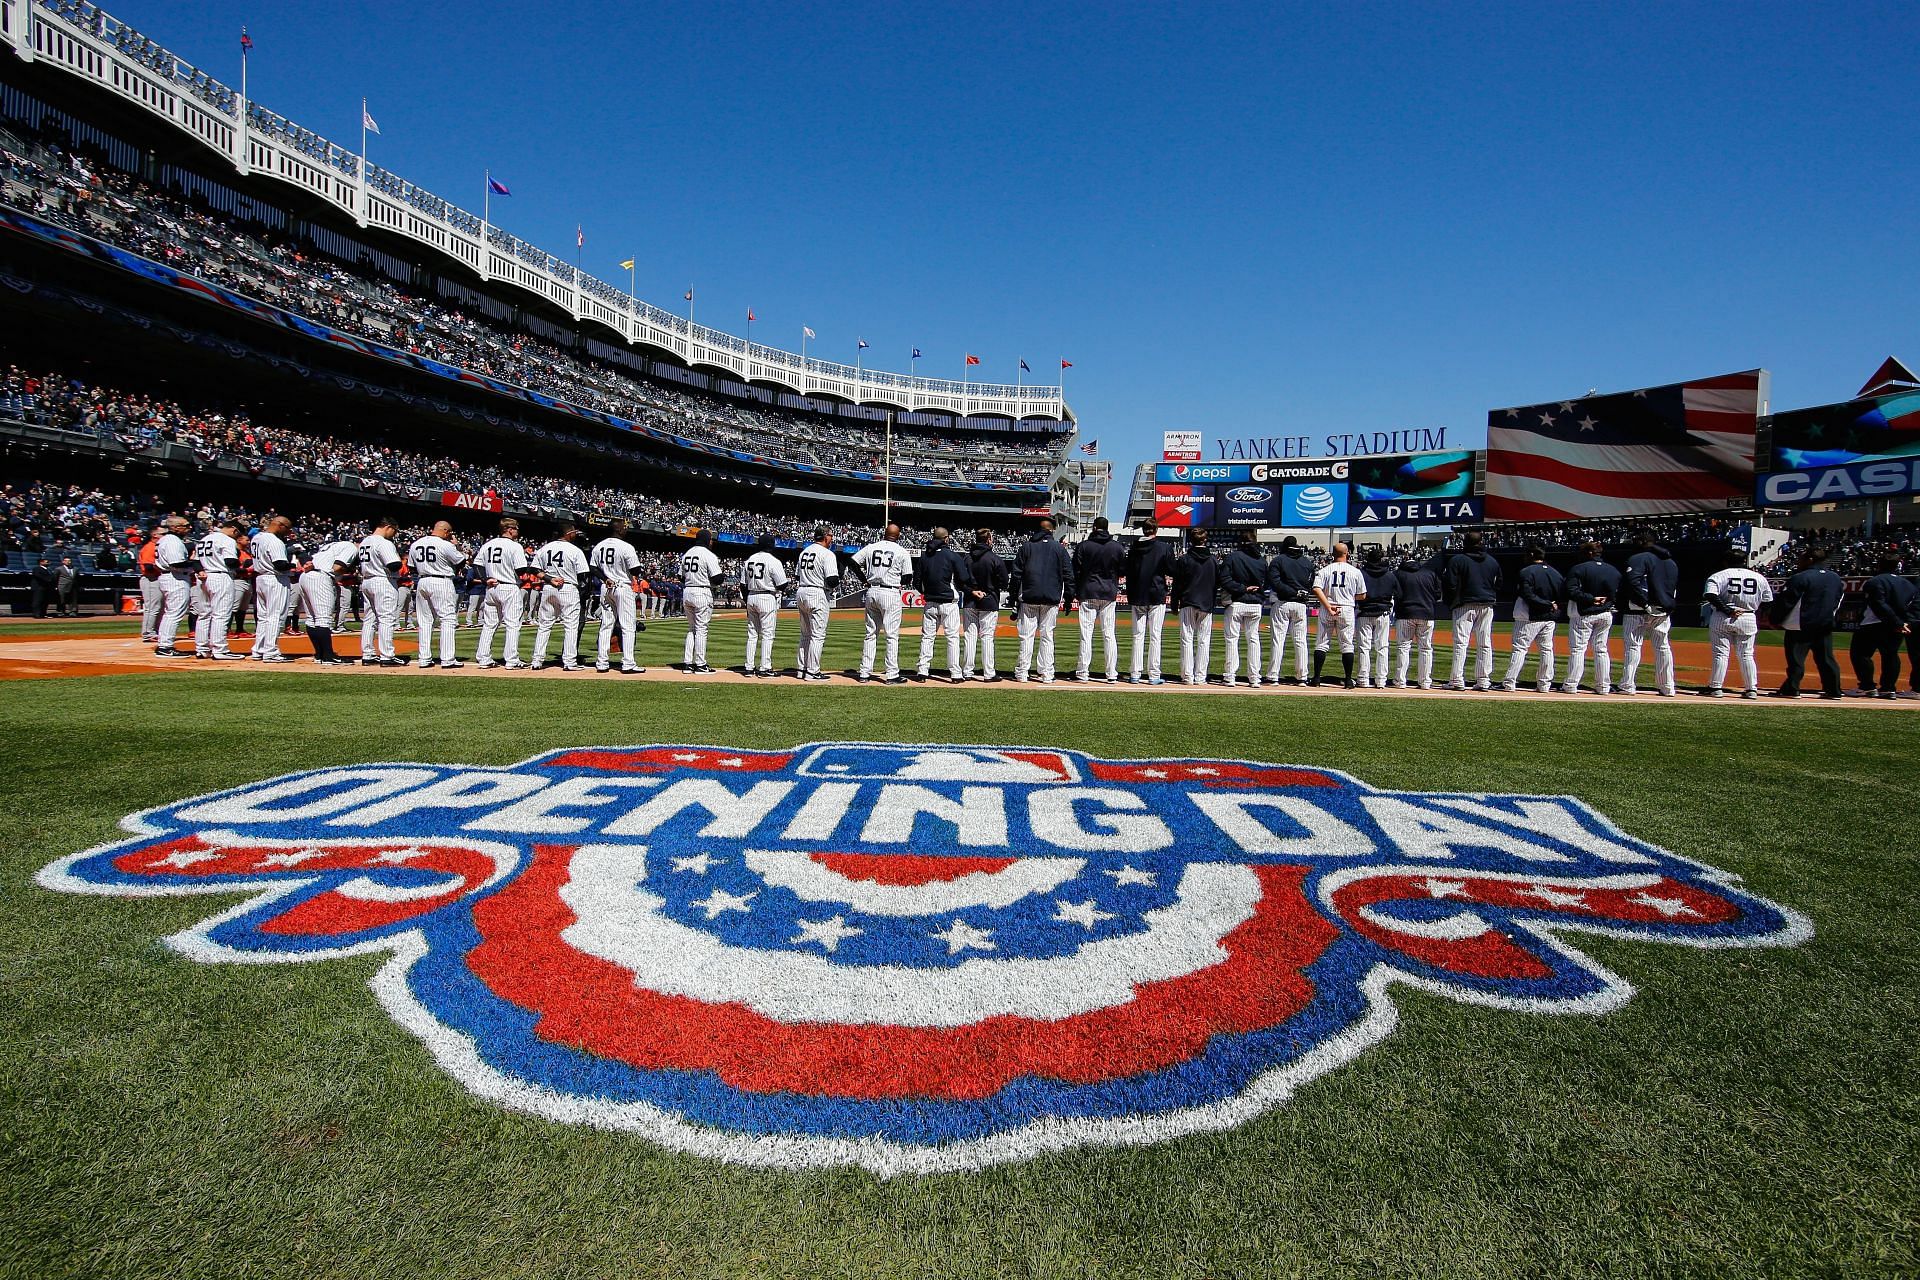 MLB Opening Day will be the debut of new rules